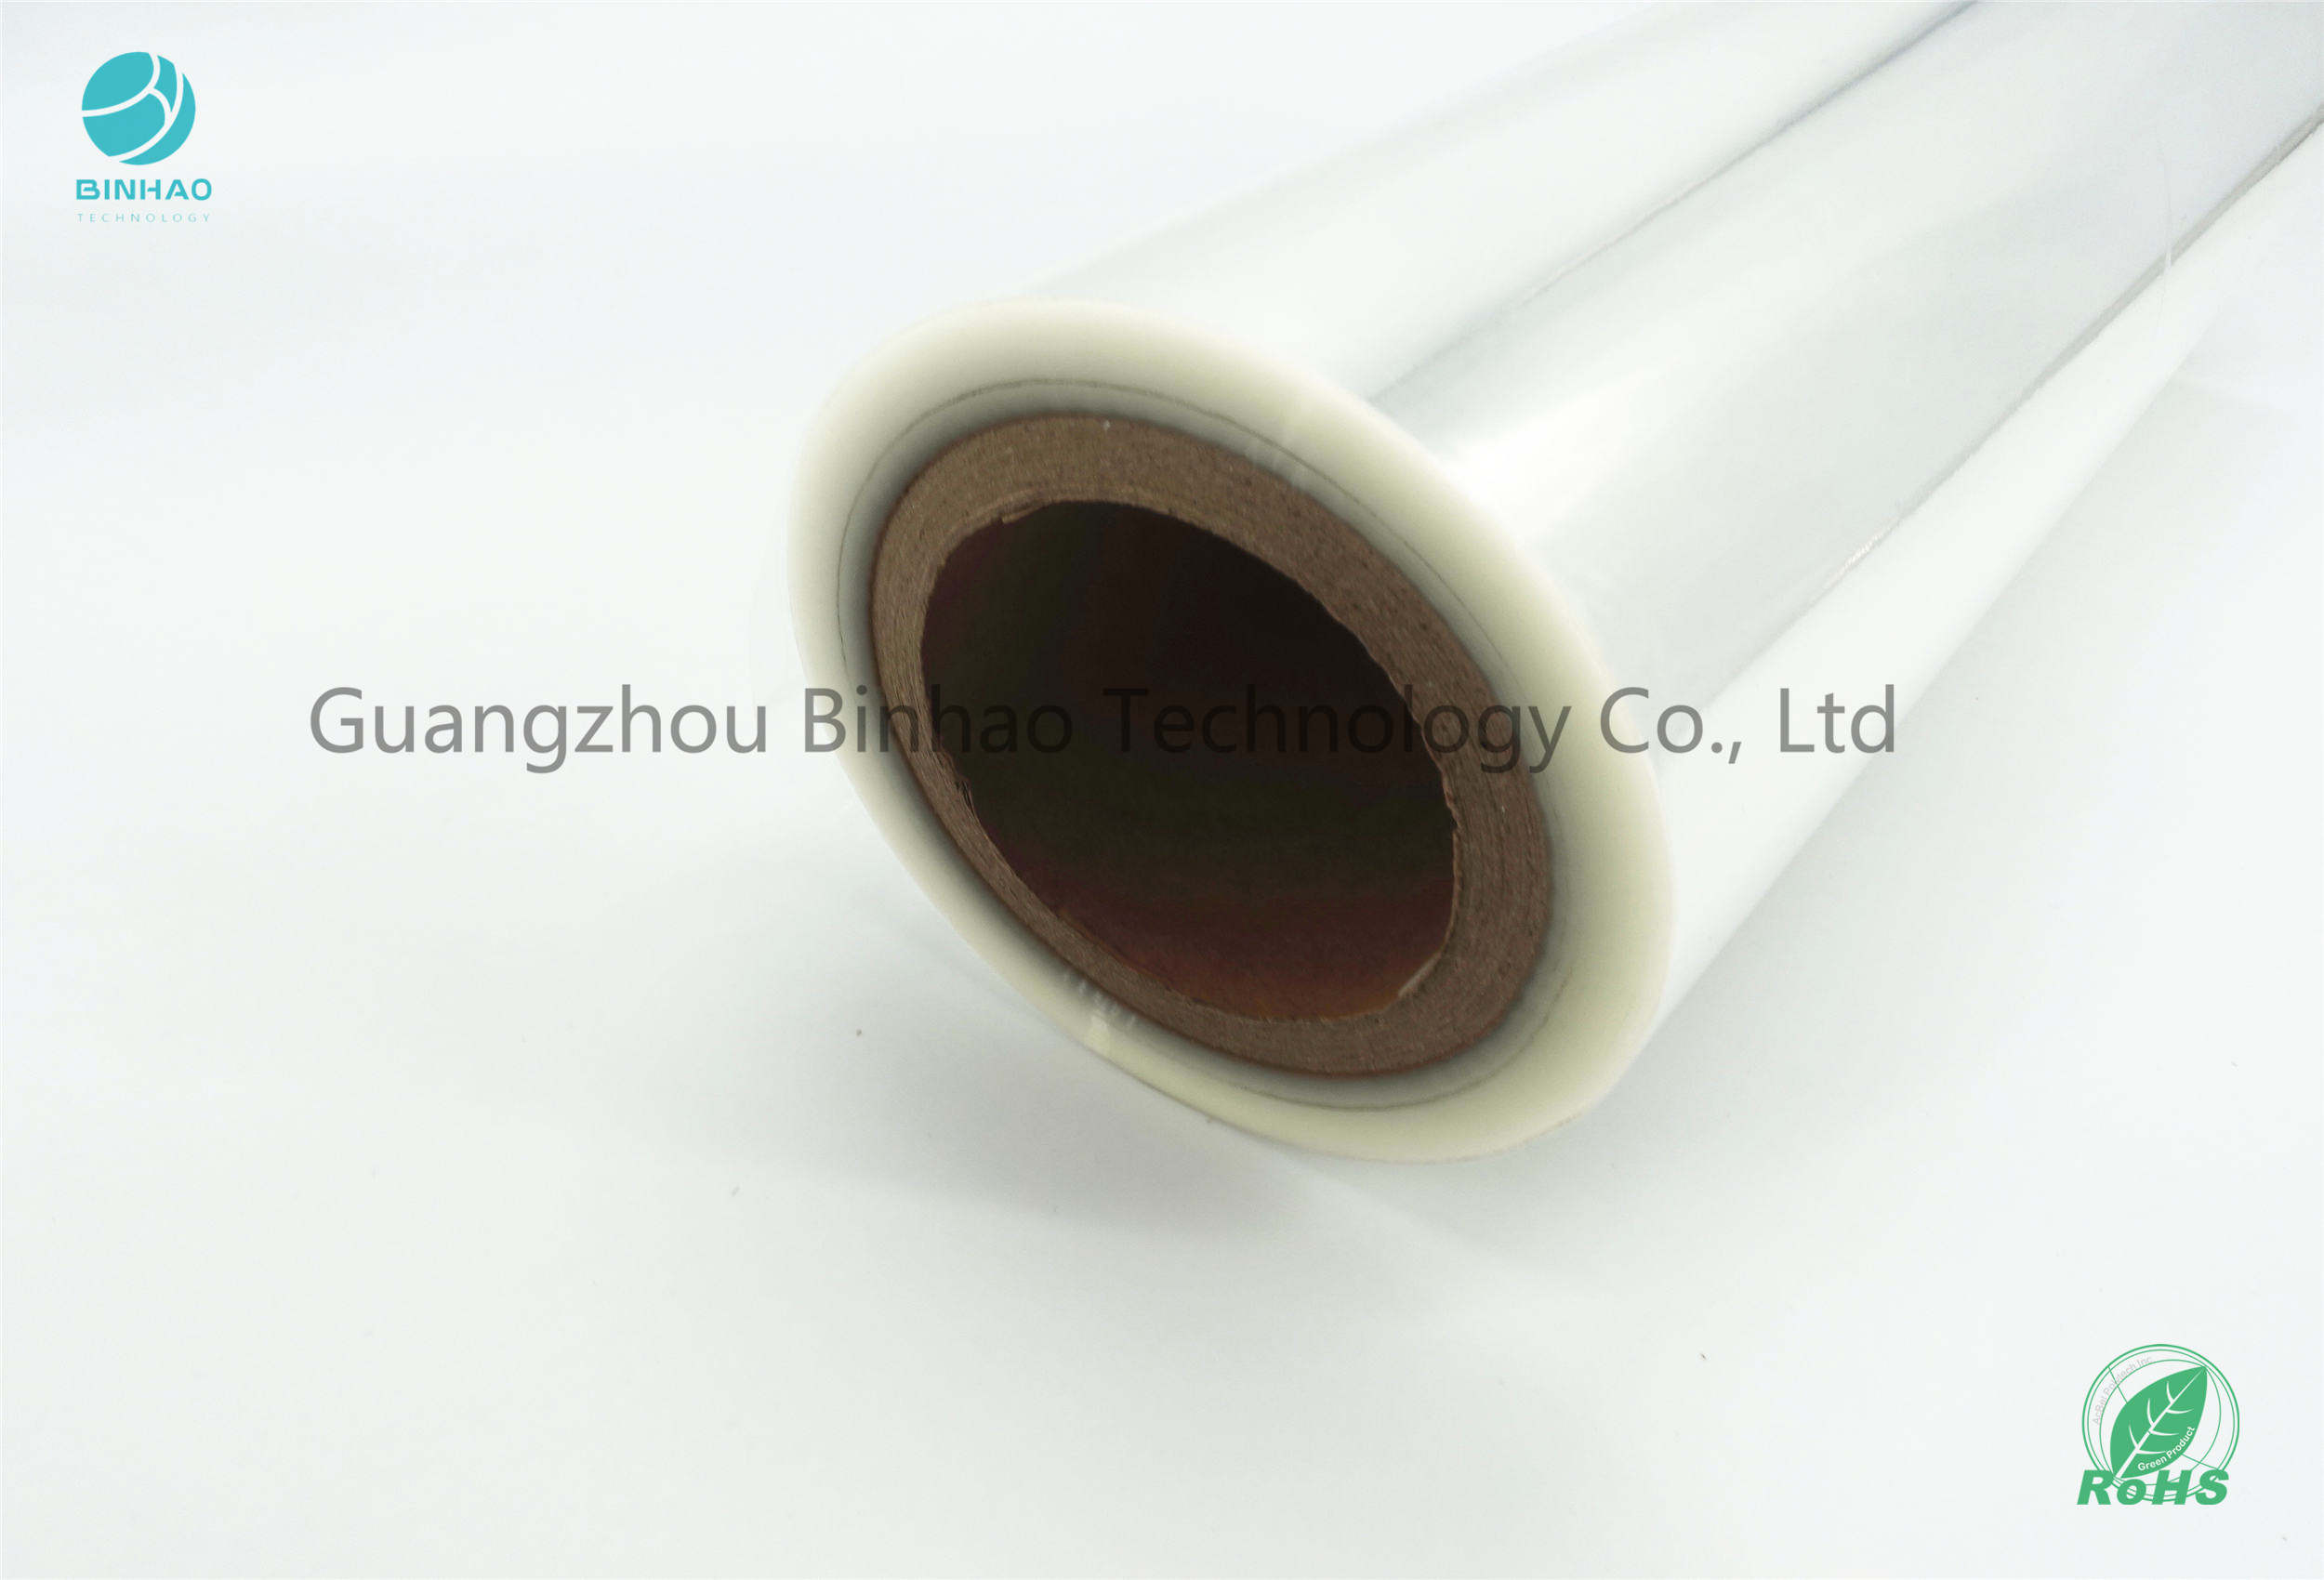 0.218 PVC Packaging Film For Tobacco